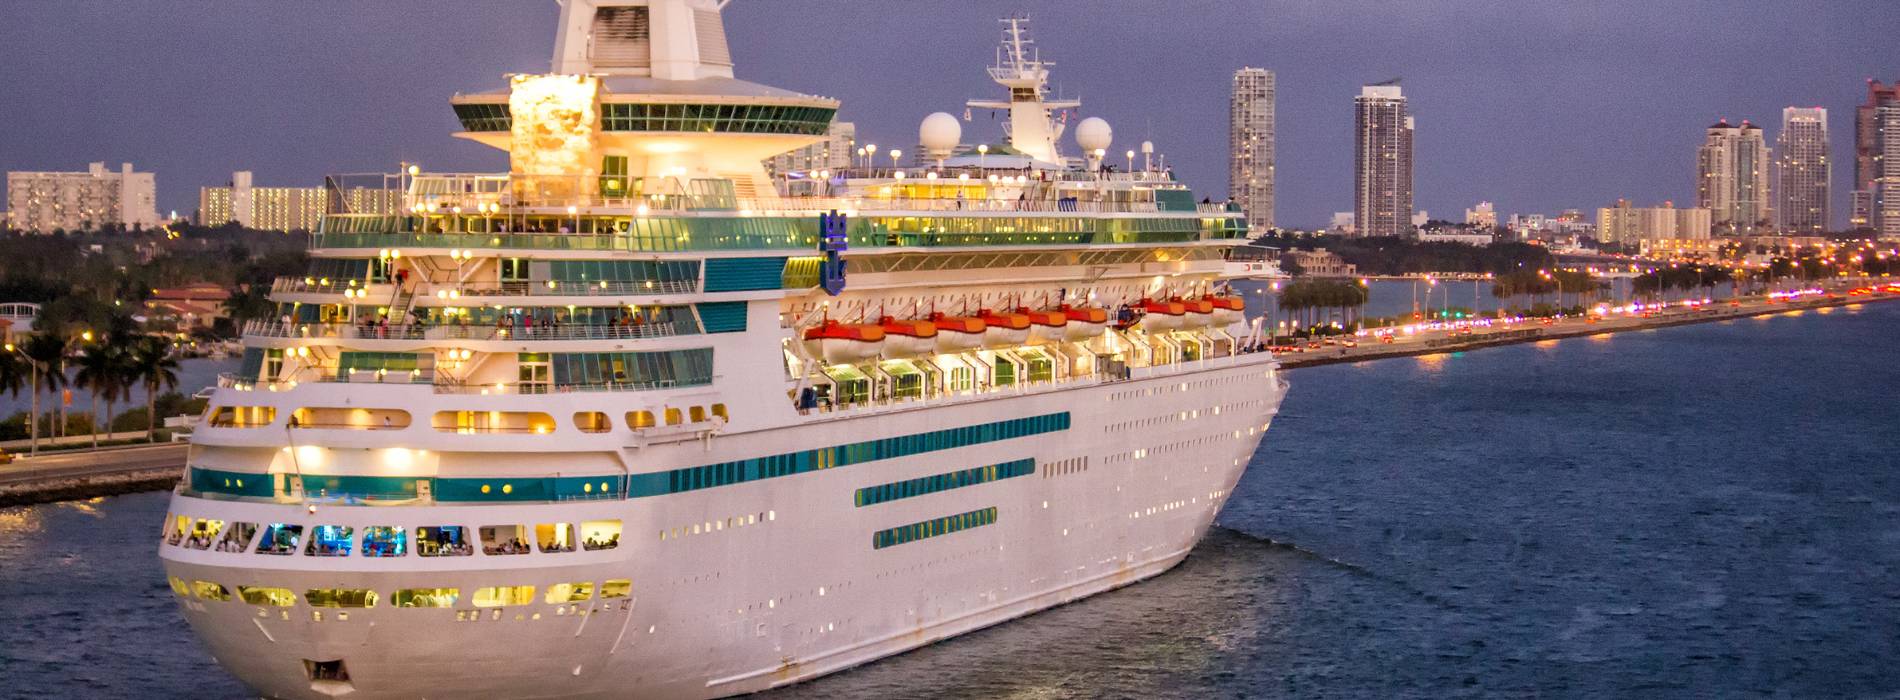 Are cruise ships worth it? - Madeinsea©